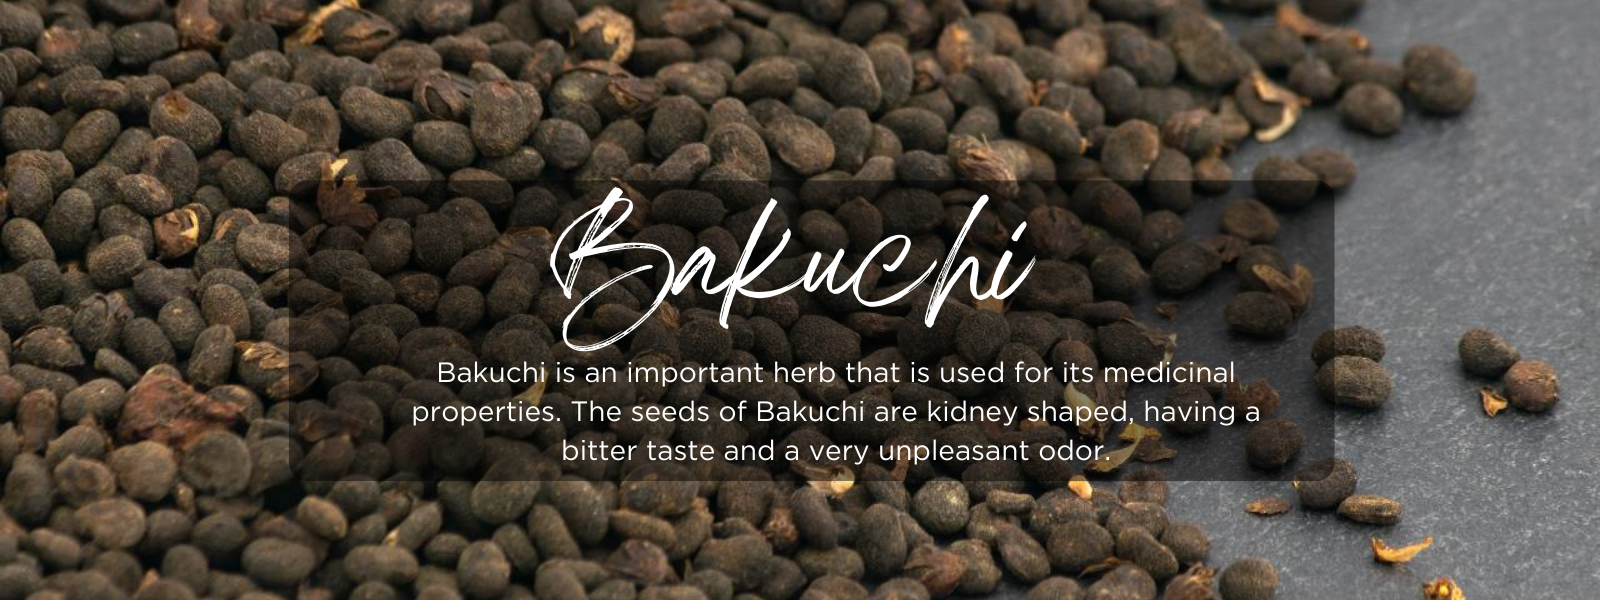 Bakuchi- Health Benefits, Uses and Important Facts